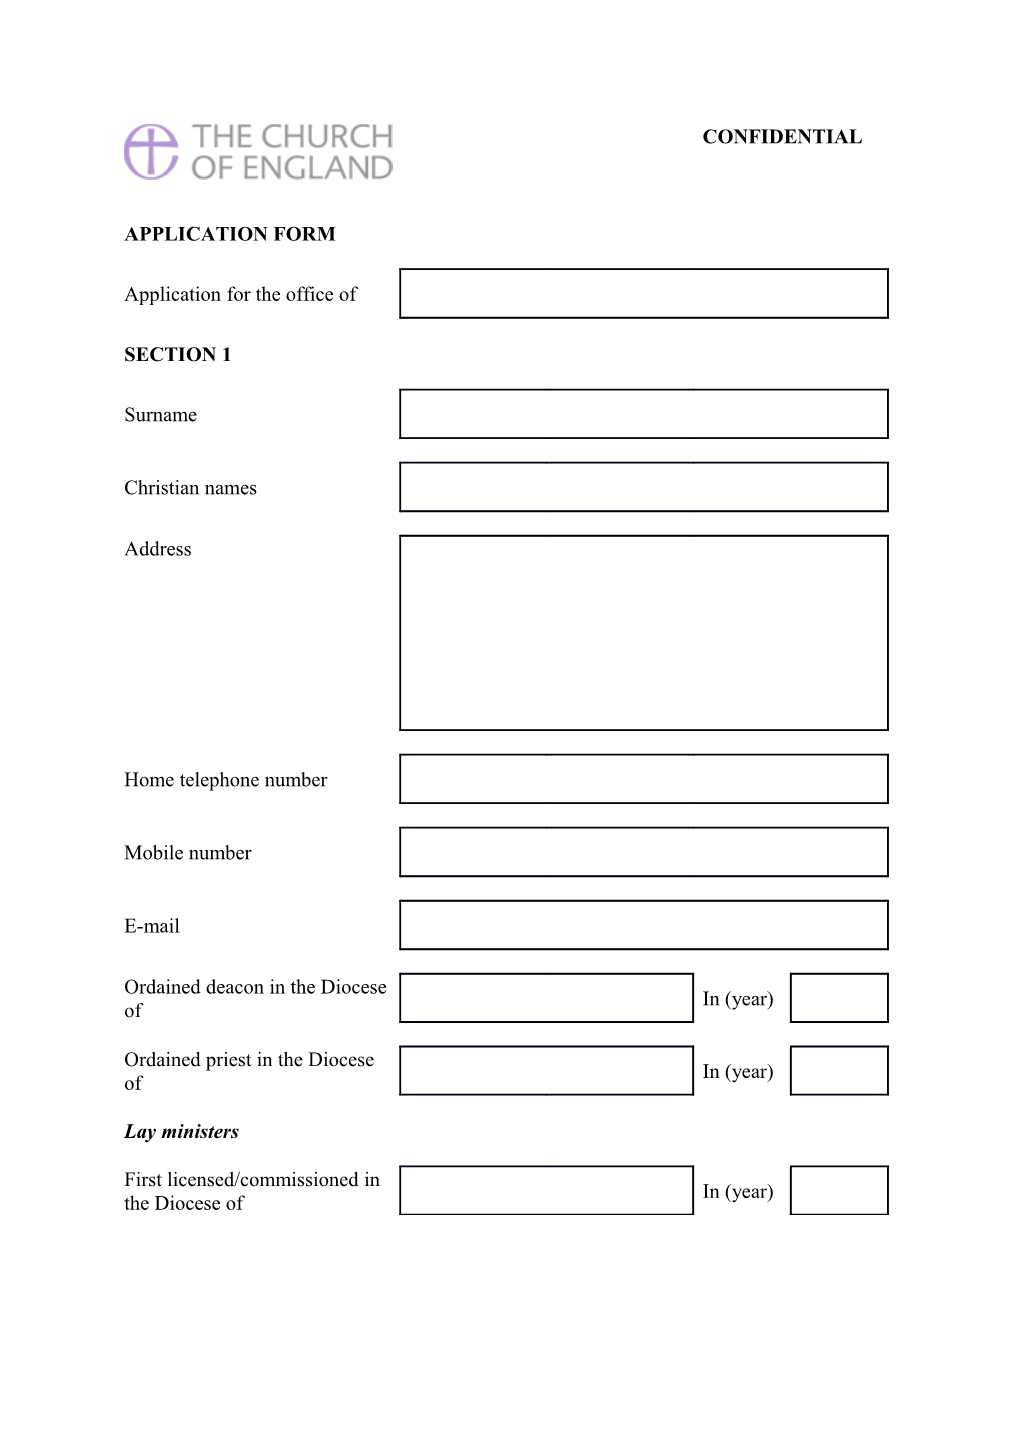 Application Form s4